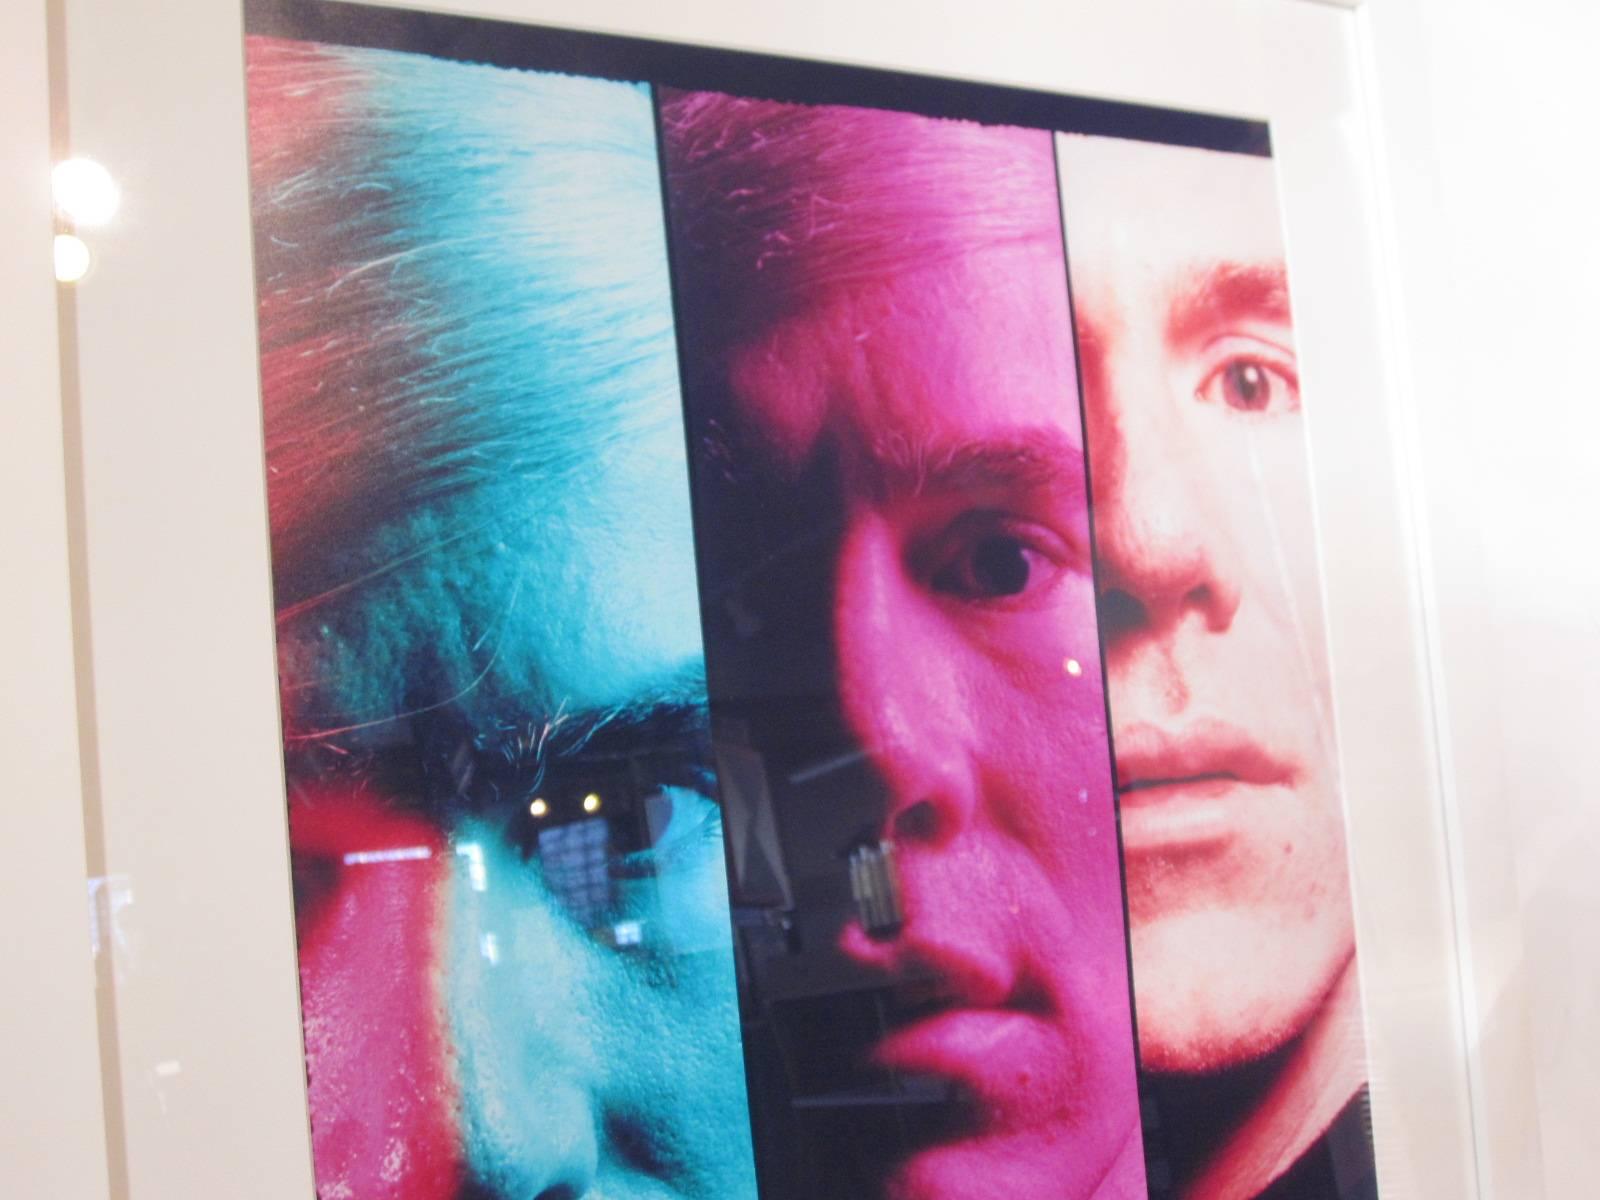 Andy Warhol portrait taken in 1968 by master photographer and printer Philippe Halsman (1906-1979) and in 1989 an edition of 100 portfolio of eight color chromogenic prints were done which sold out. This print is a proof from the artist archive.